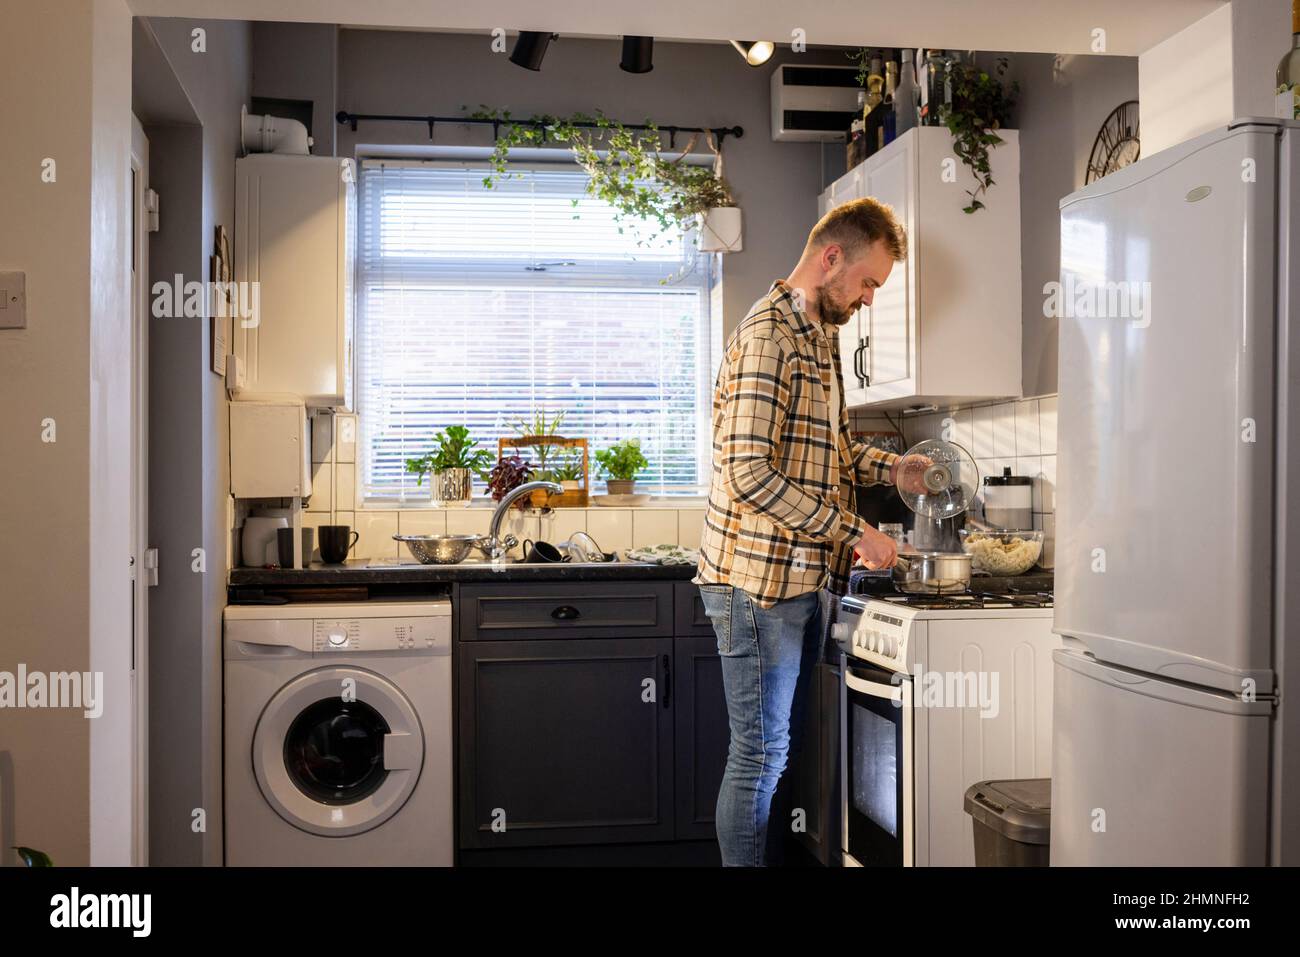 A side-view shot of a caucasian man standing in his kitchen, he is making pasta for lunch. Stock Photo